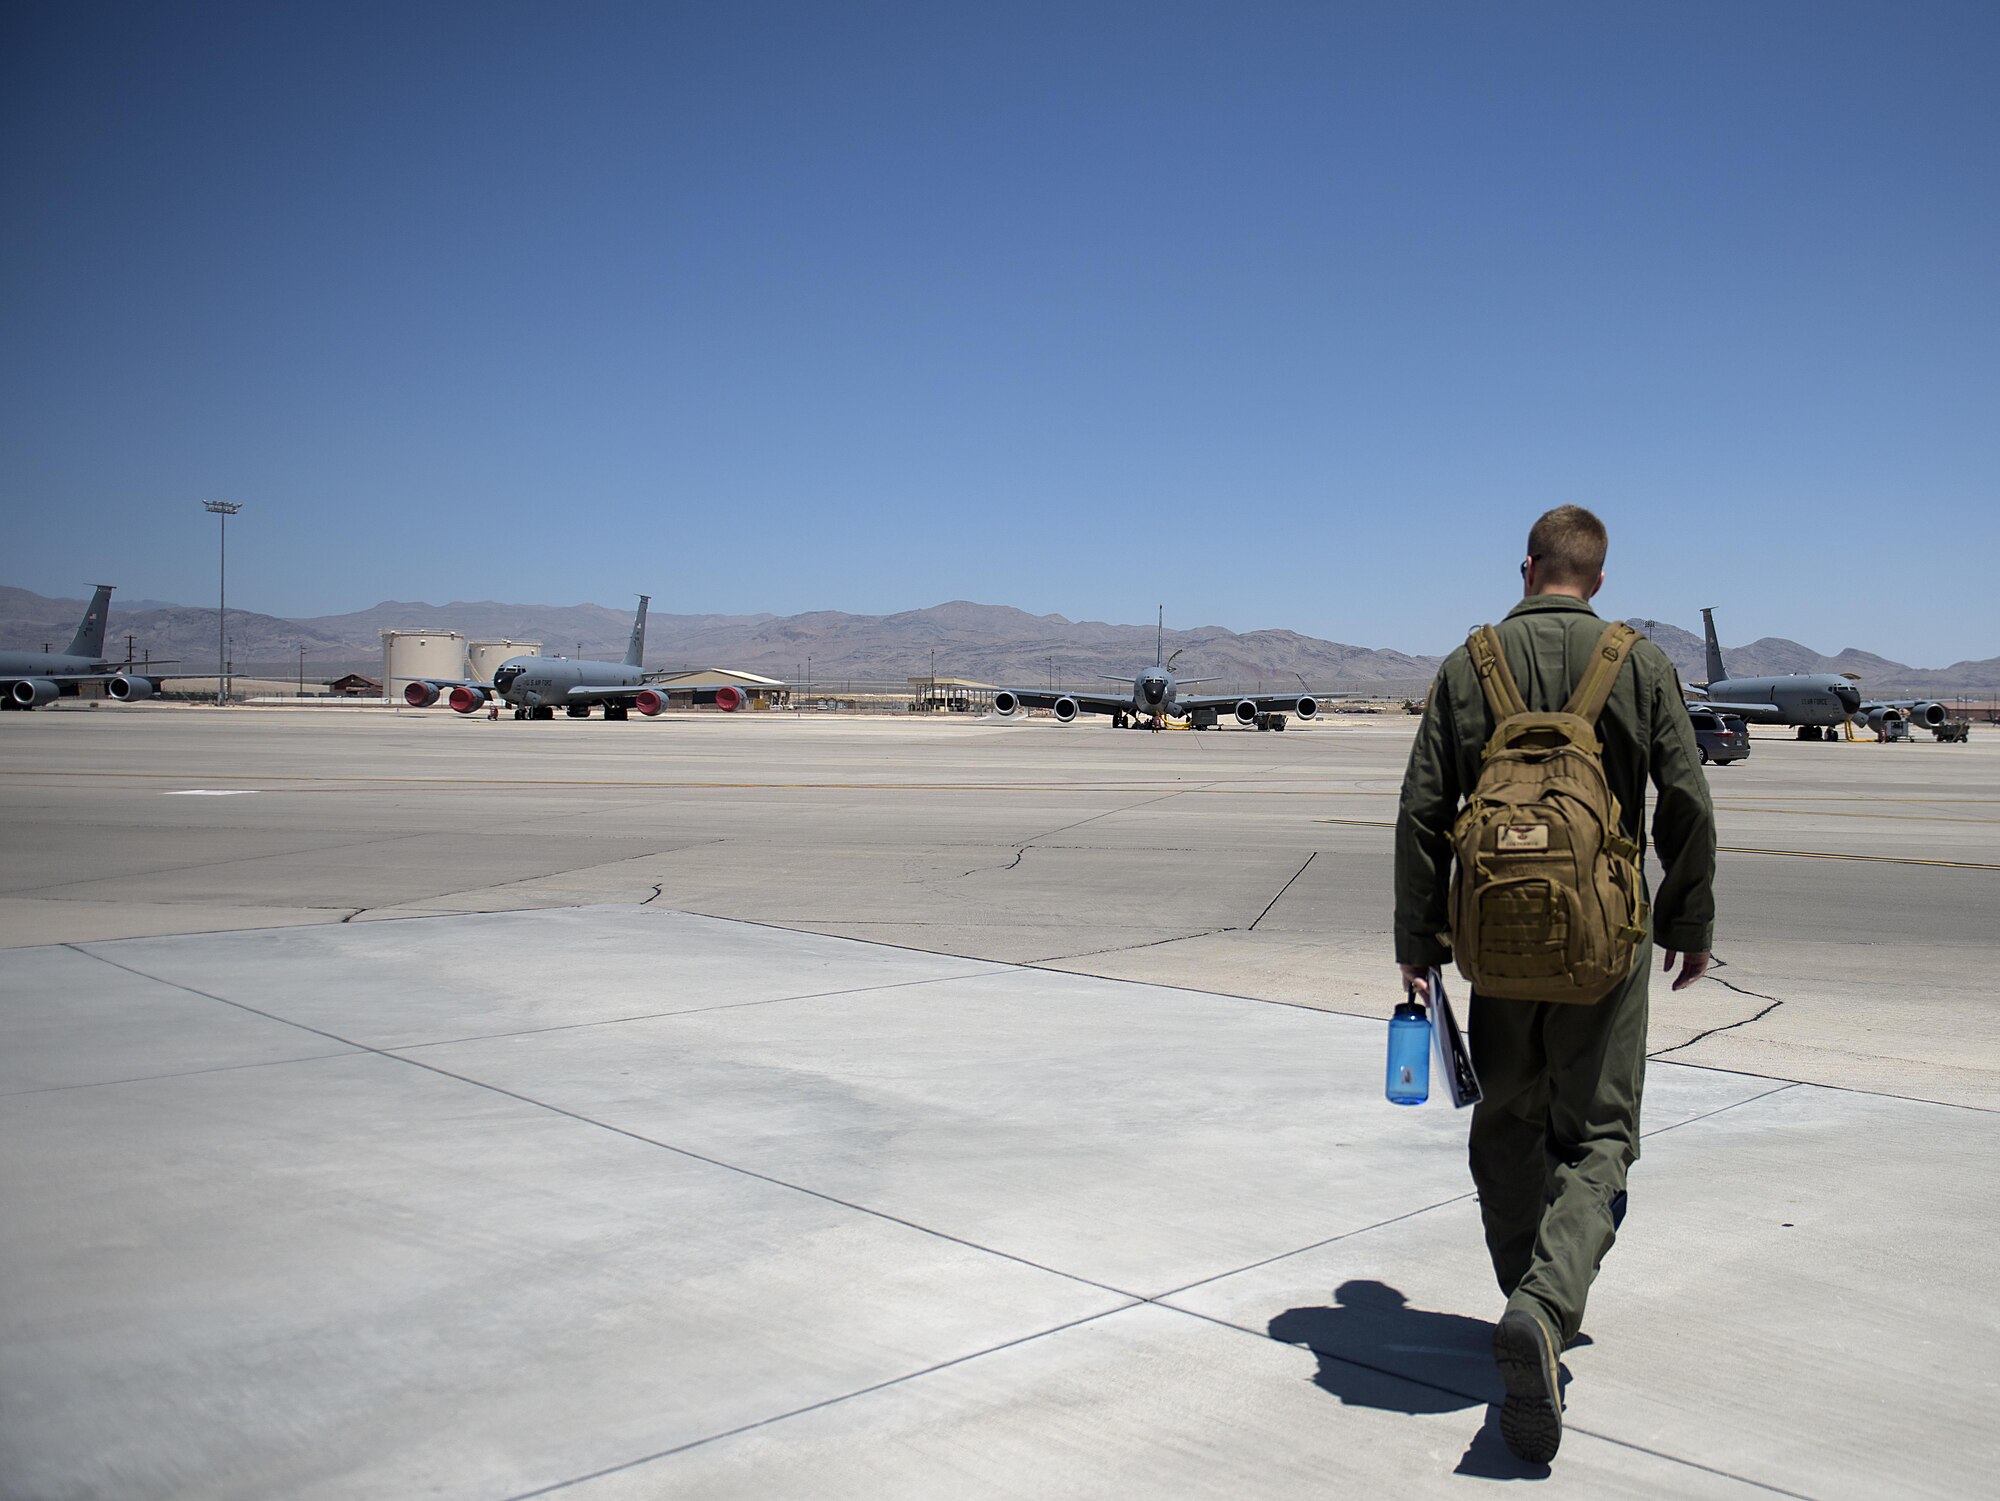 Capt. Dan Fenwick, a KC-135 Stratotanker pilot from MacDill Air Force Base, heads out to his plane for the day at Nellis Air Force Base, Nevada July 18, 2015 during exercise Red Flag. Red Flag 16-3 is one of four Red Flag exercises at Nellis--this edition of Red Flag focusing on multi-domain operations in air, space and cyberspace. (U.S. Air Force photo/Tech. Sgt. David Salanitri)